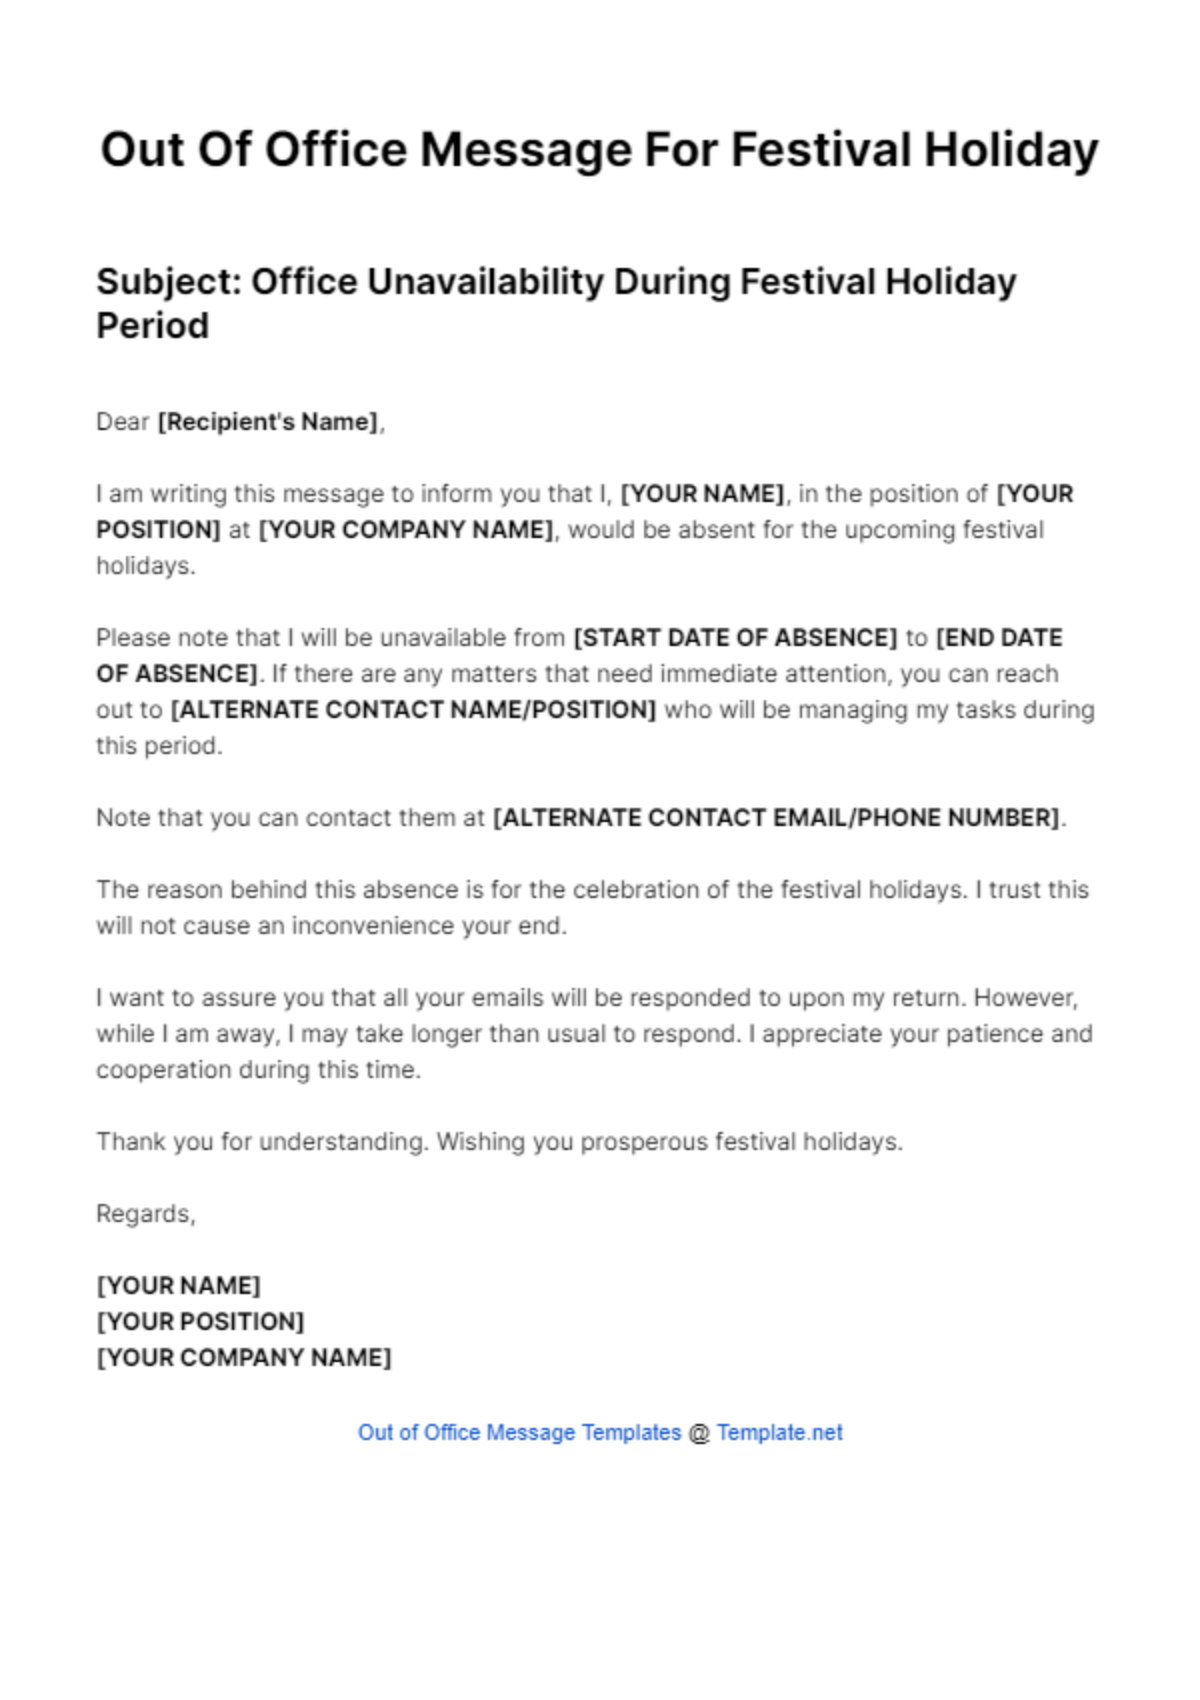 Out Of Office Message For Festival Holiday Template